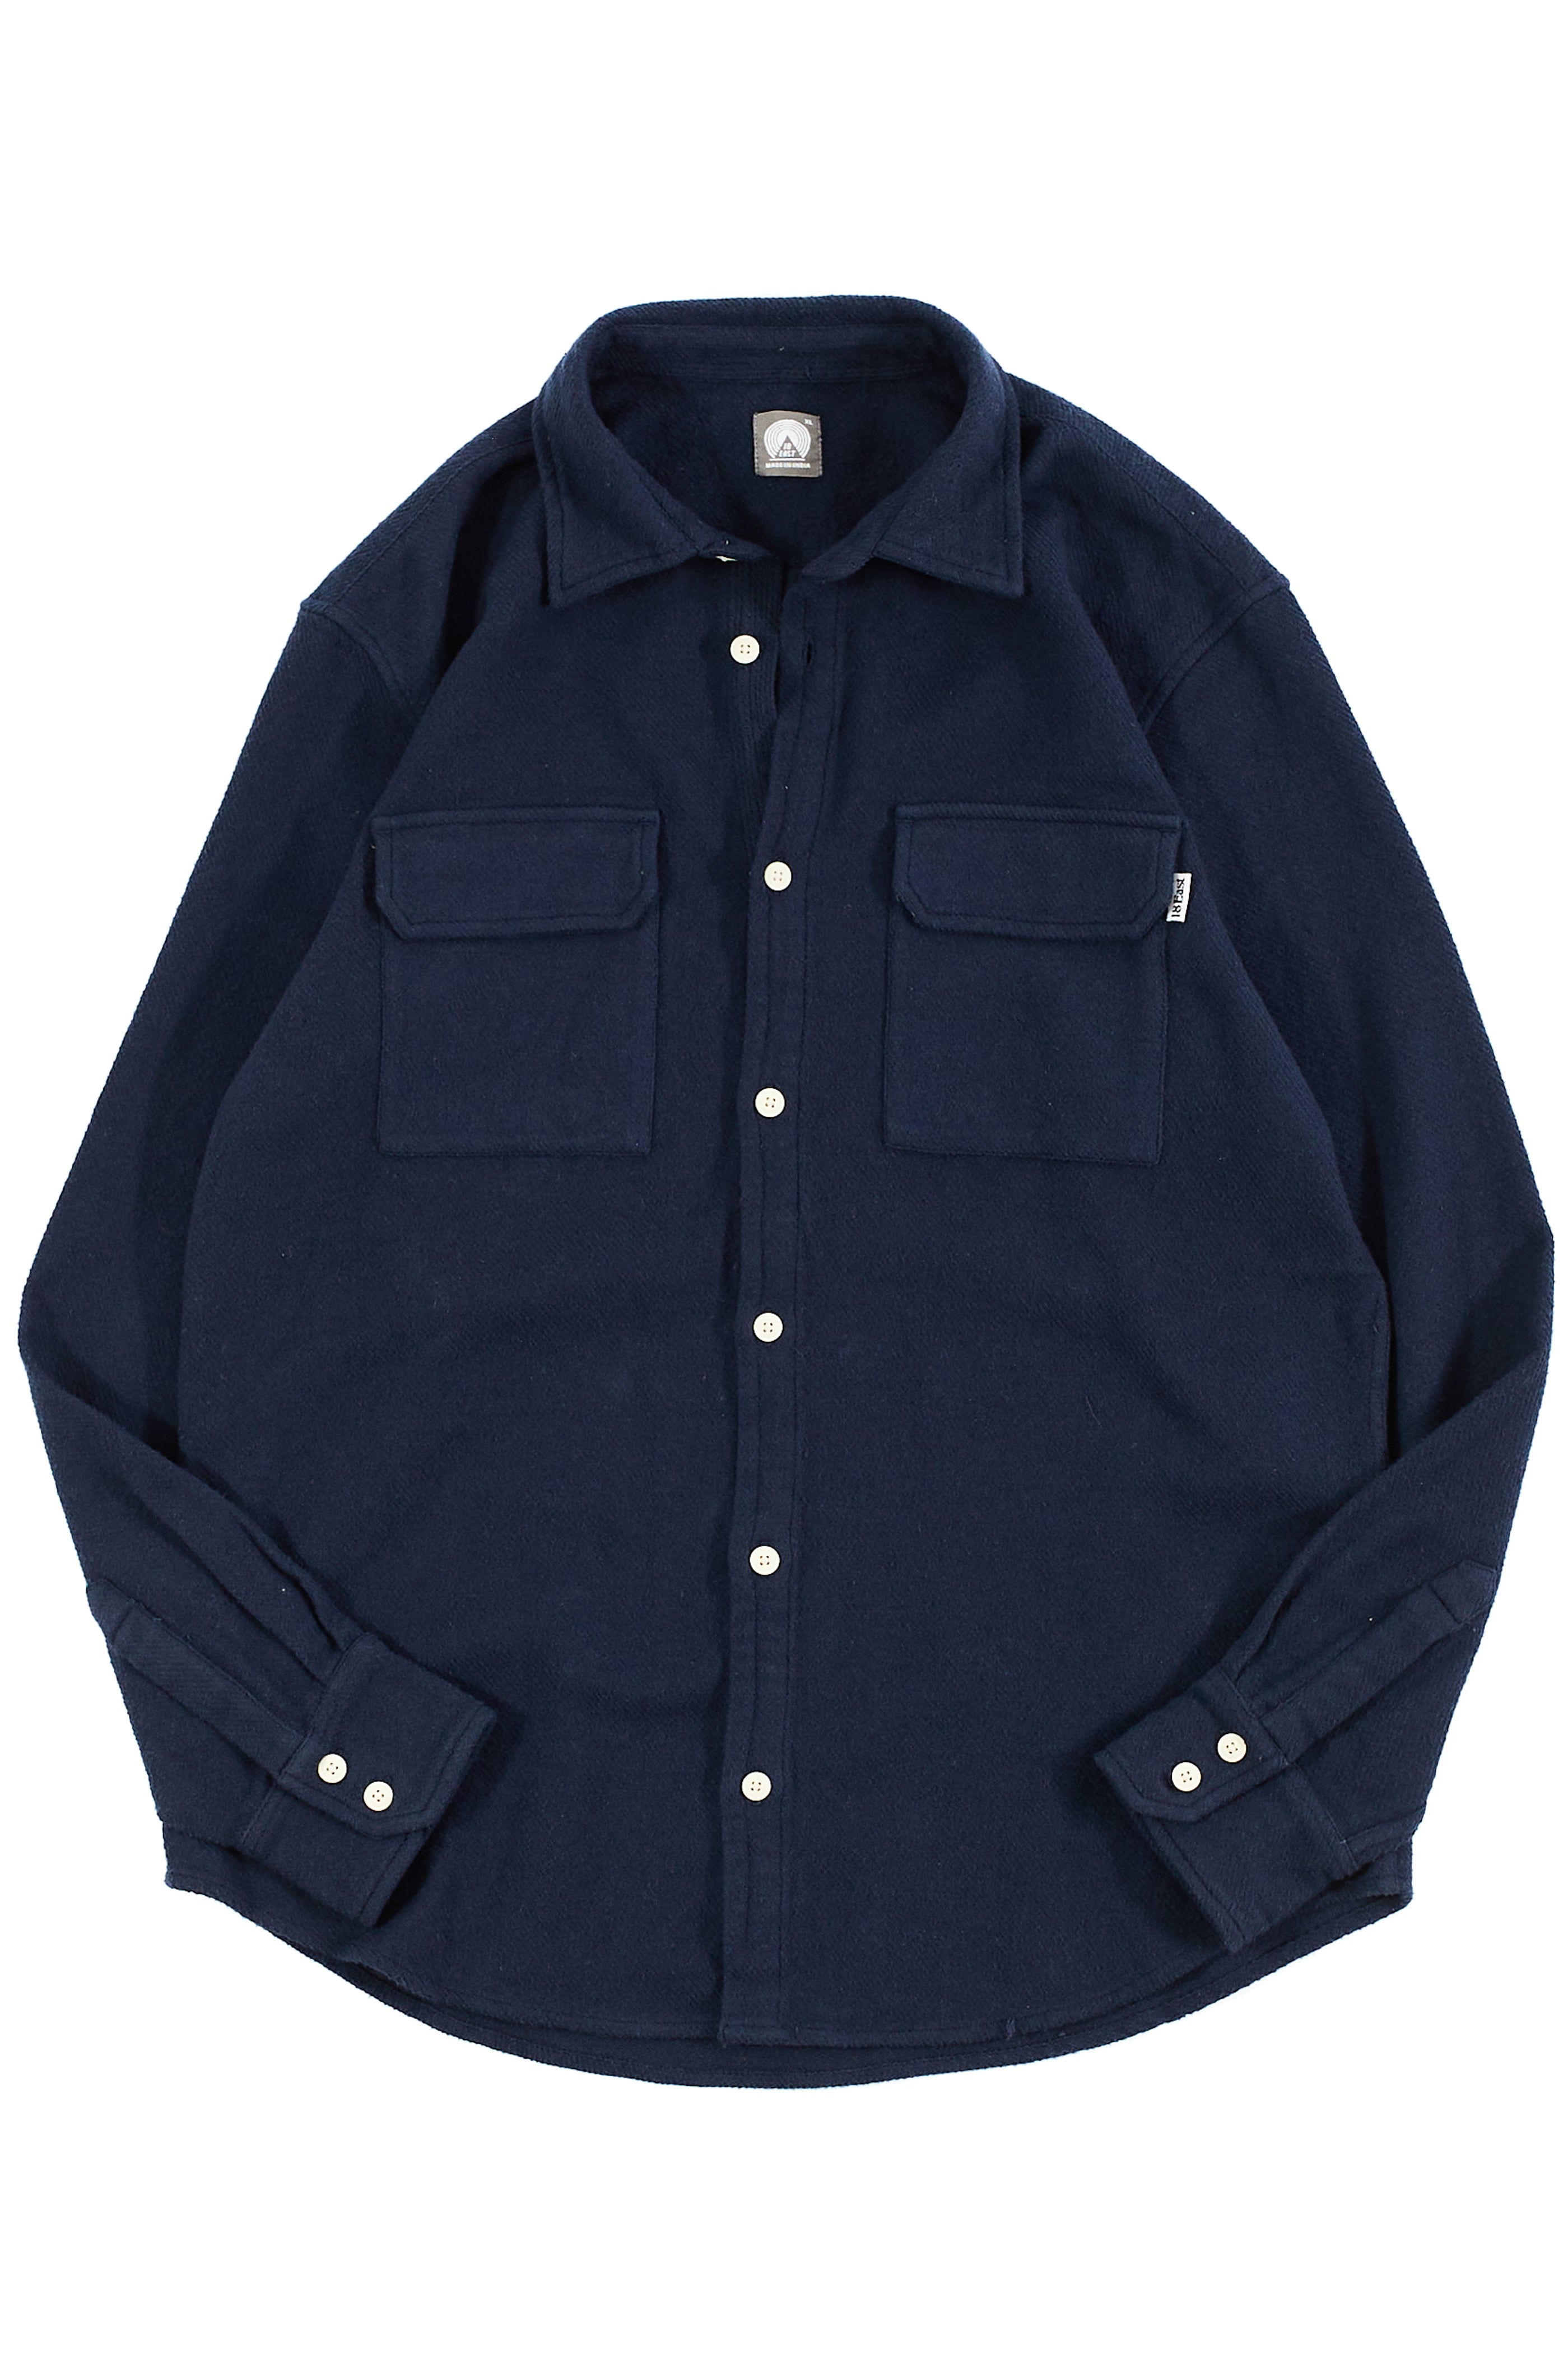 FIELD SHIRT - OMBRE BLUE BRUSHED COTTON TWILL